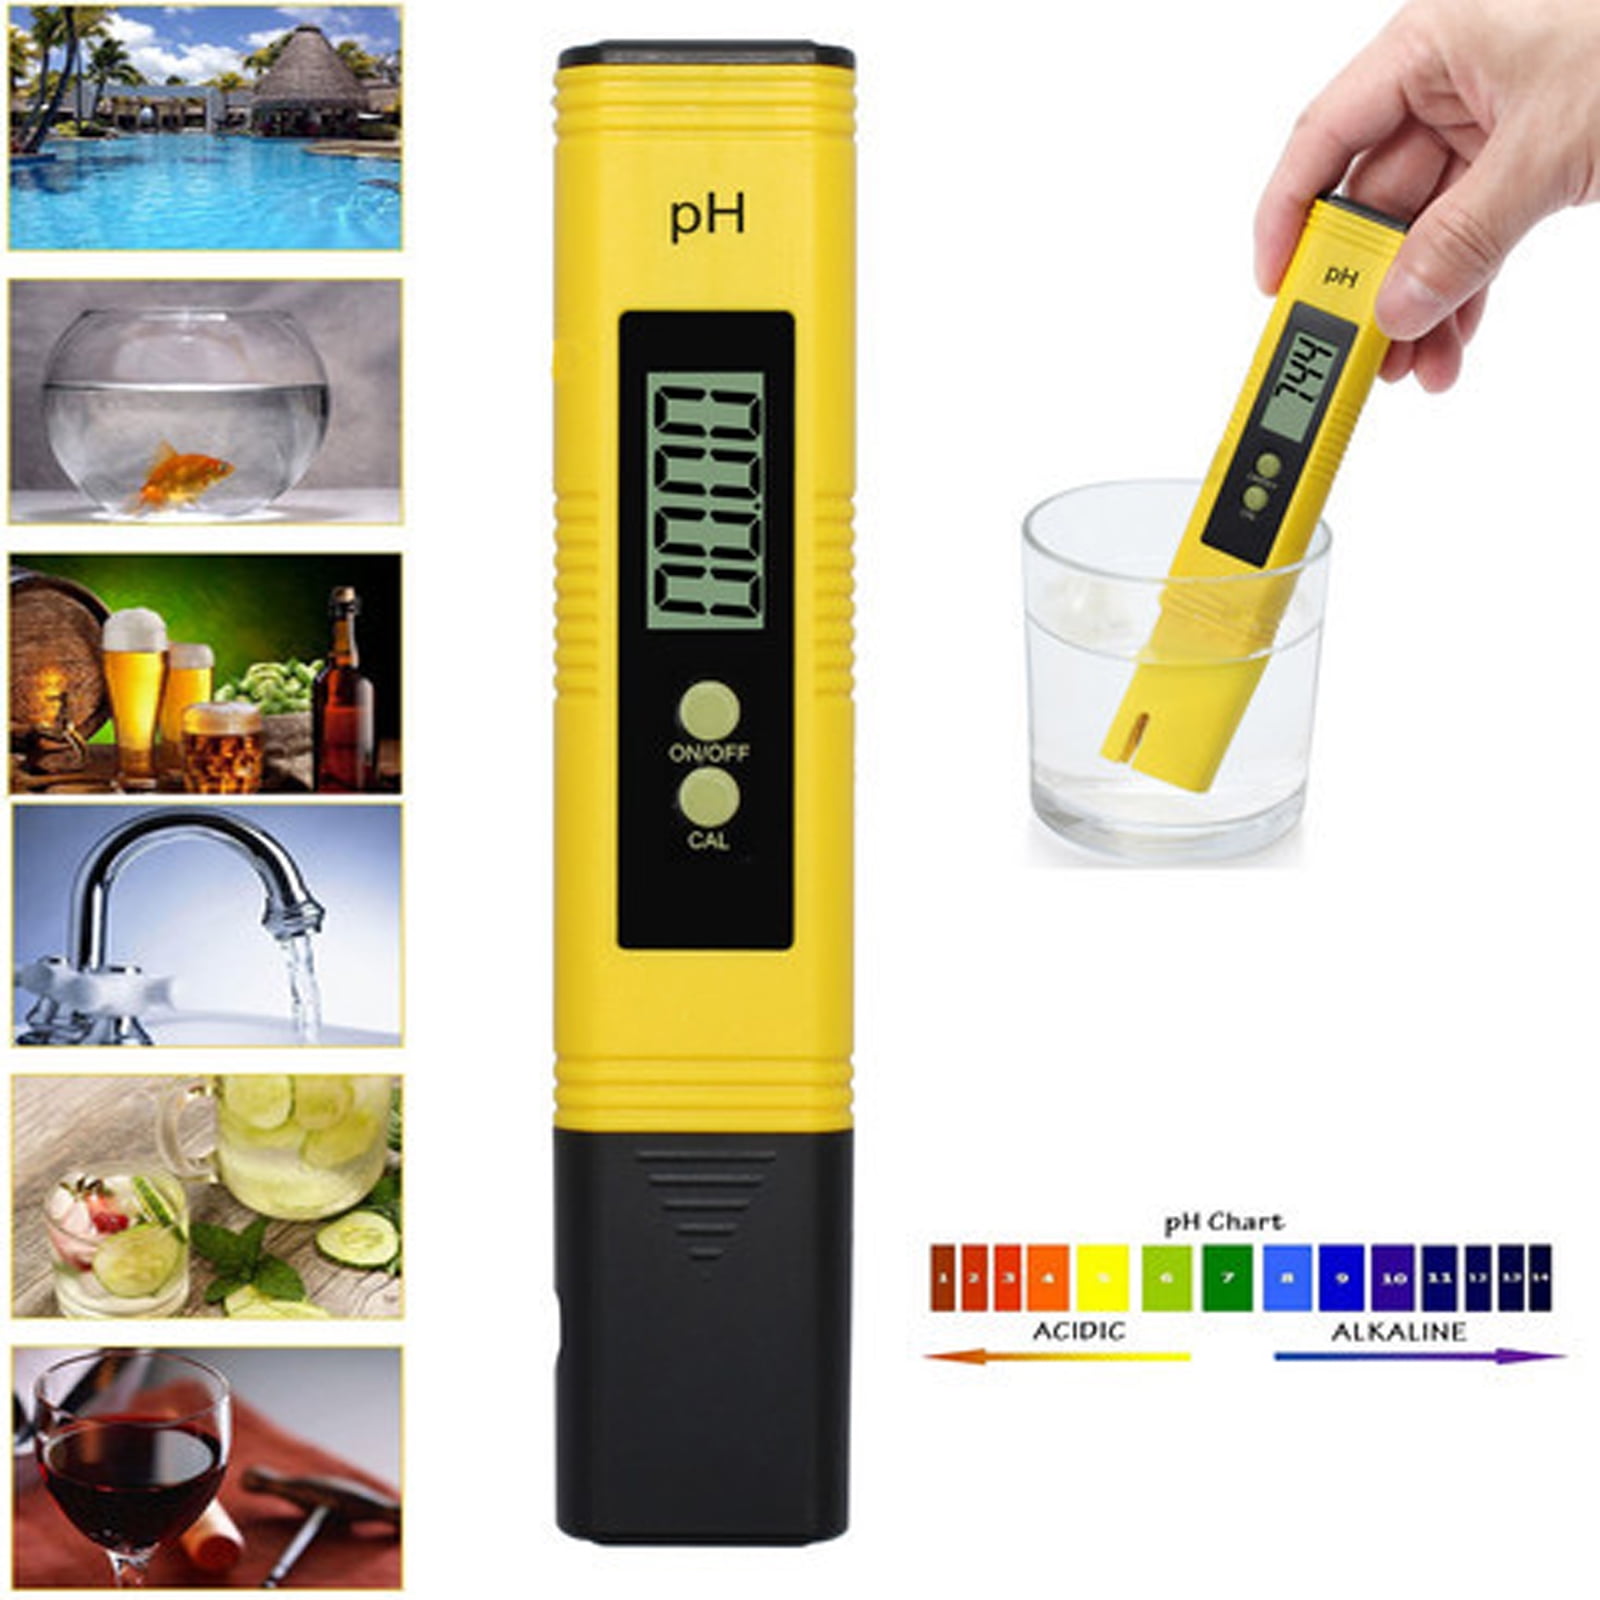 Swimming Pools Aquarium Digital PH Meter Water Quality PH Tester Pocket Size Water Quality Tester with ATC 0-14 pH Measurement Range for Household Drinking Water Hydroponics 